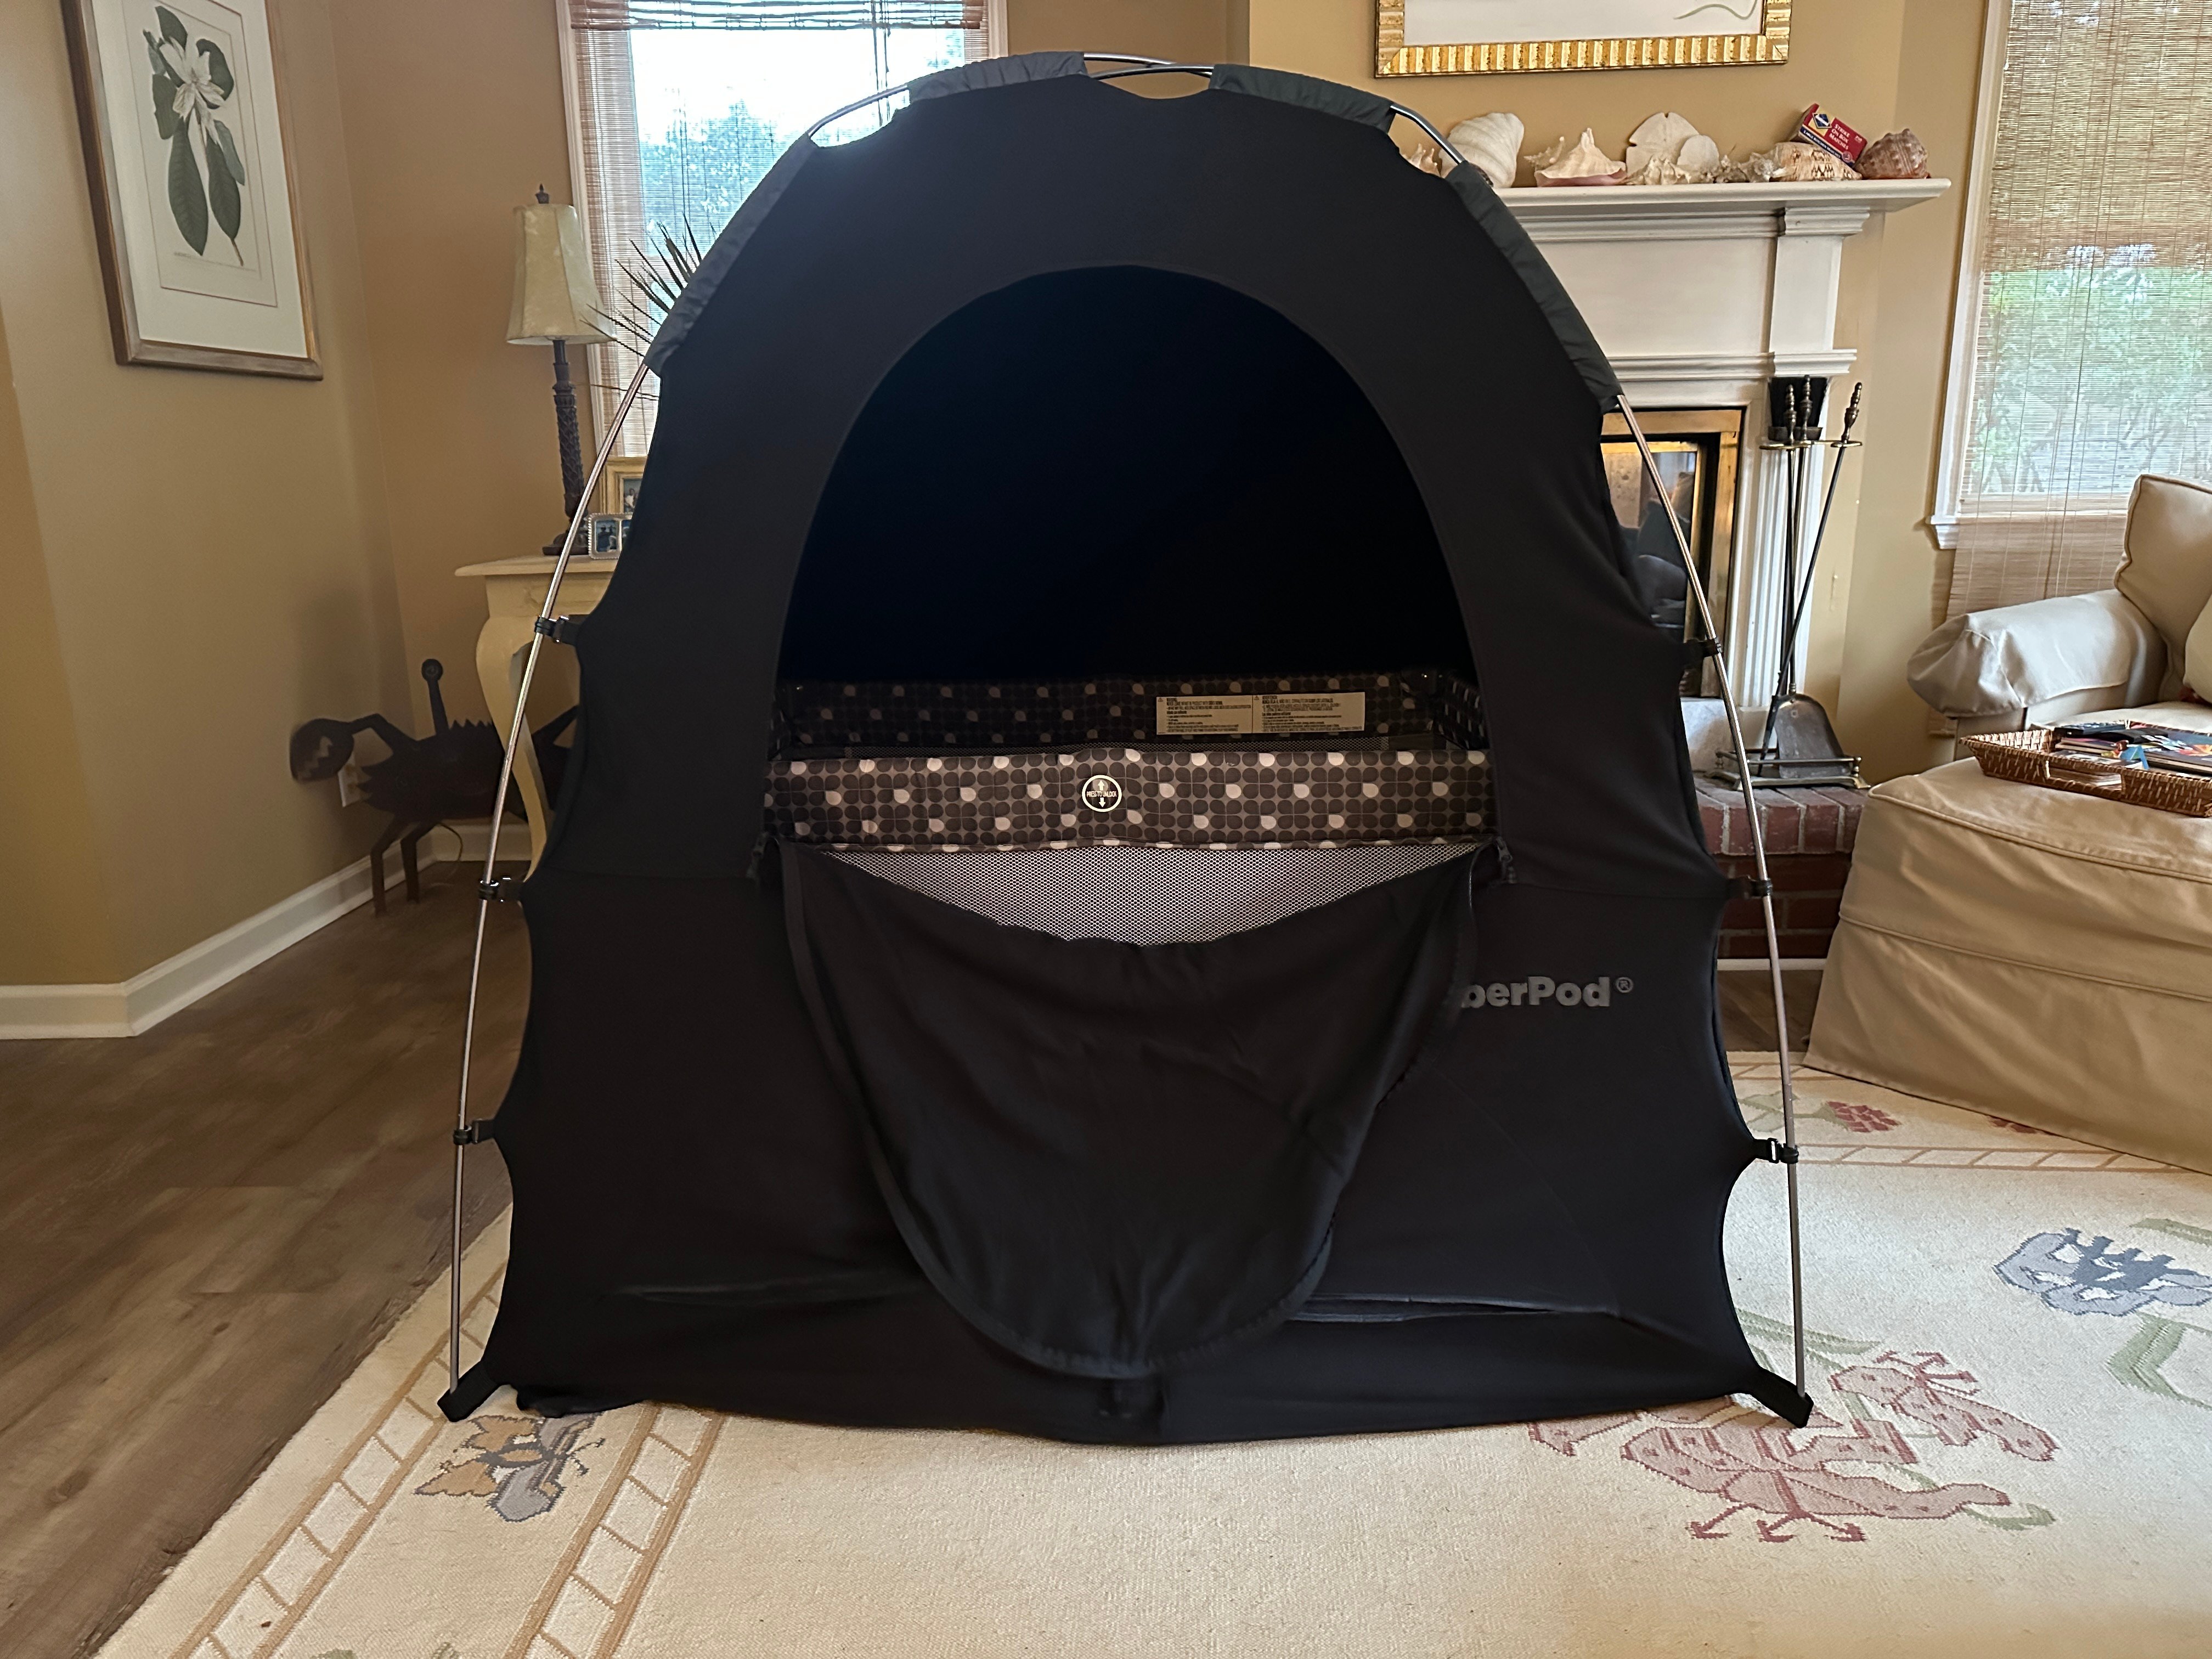 Slumber Pod Review: Get Baby to Sleep Soundly While Traveling